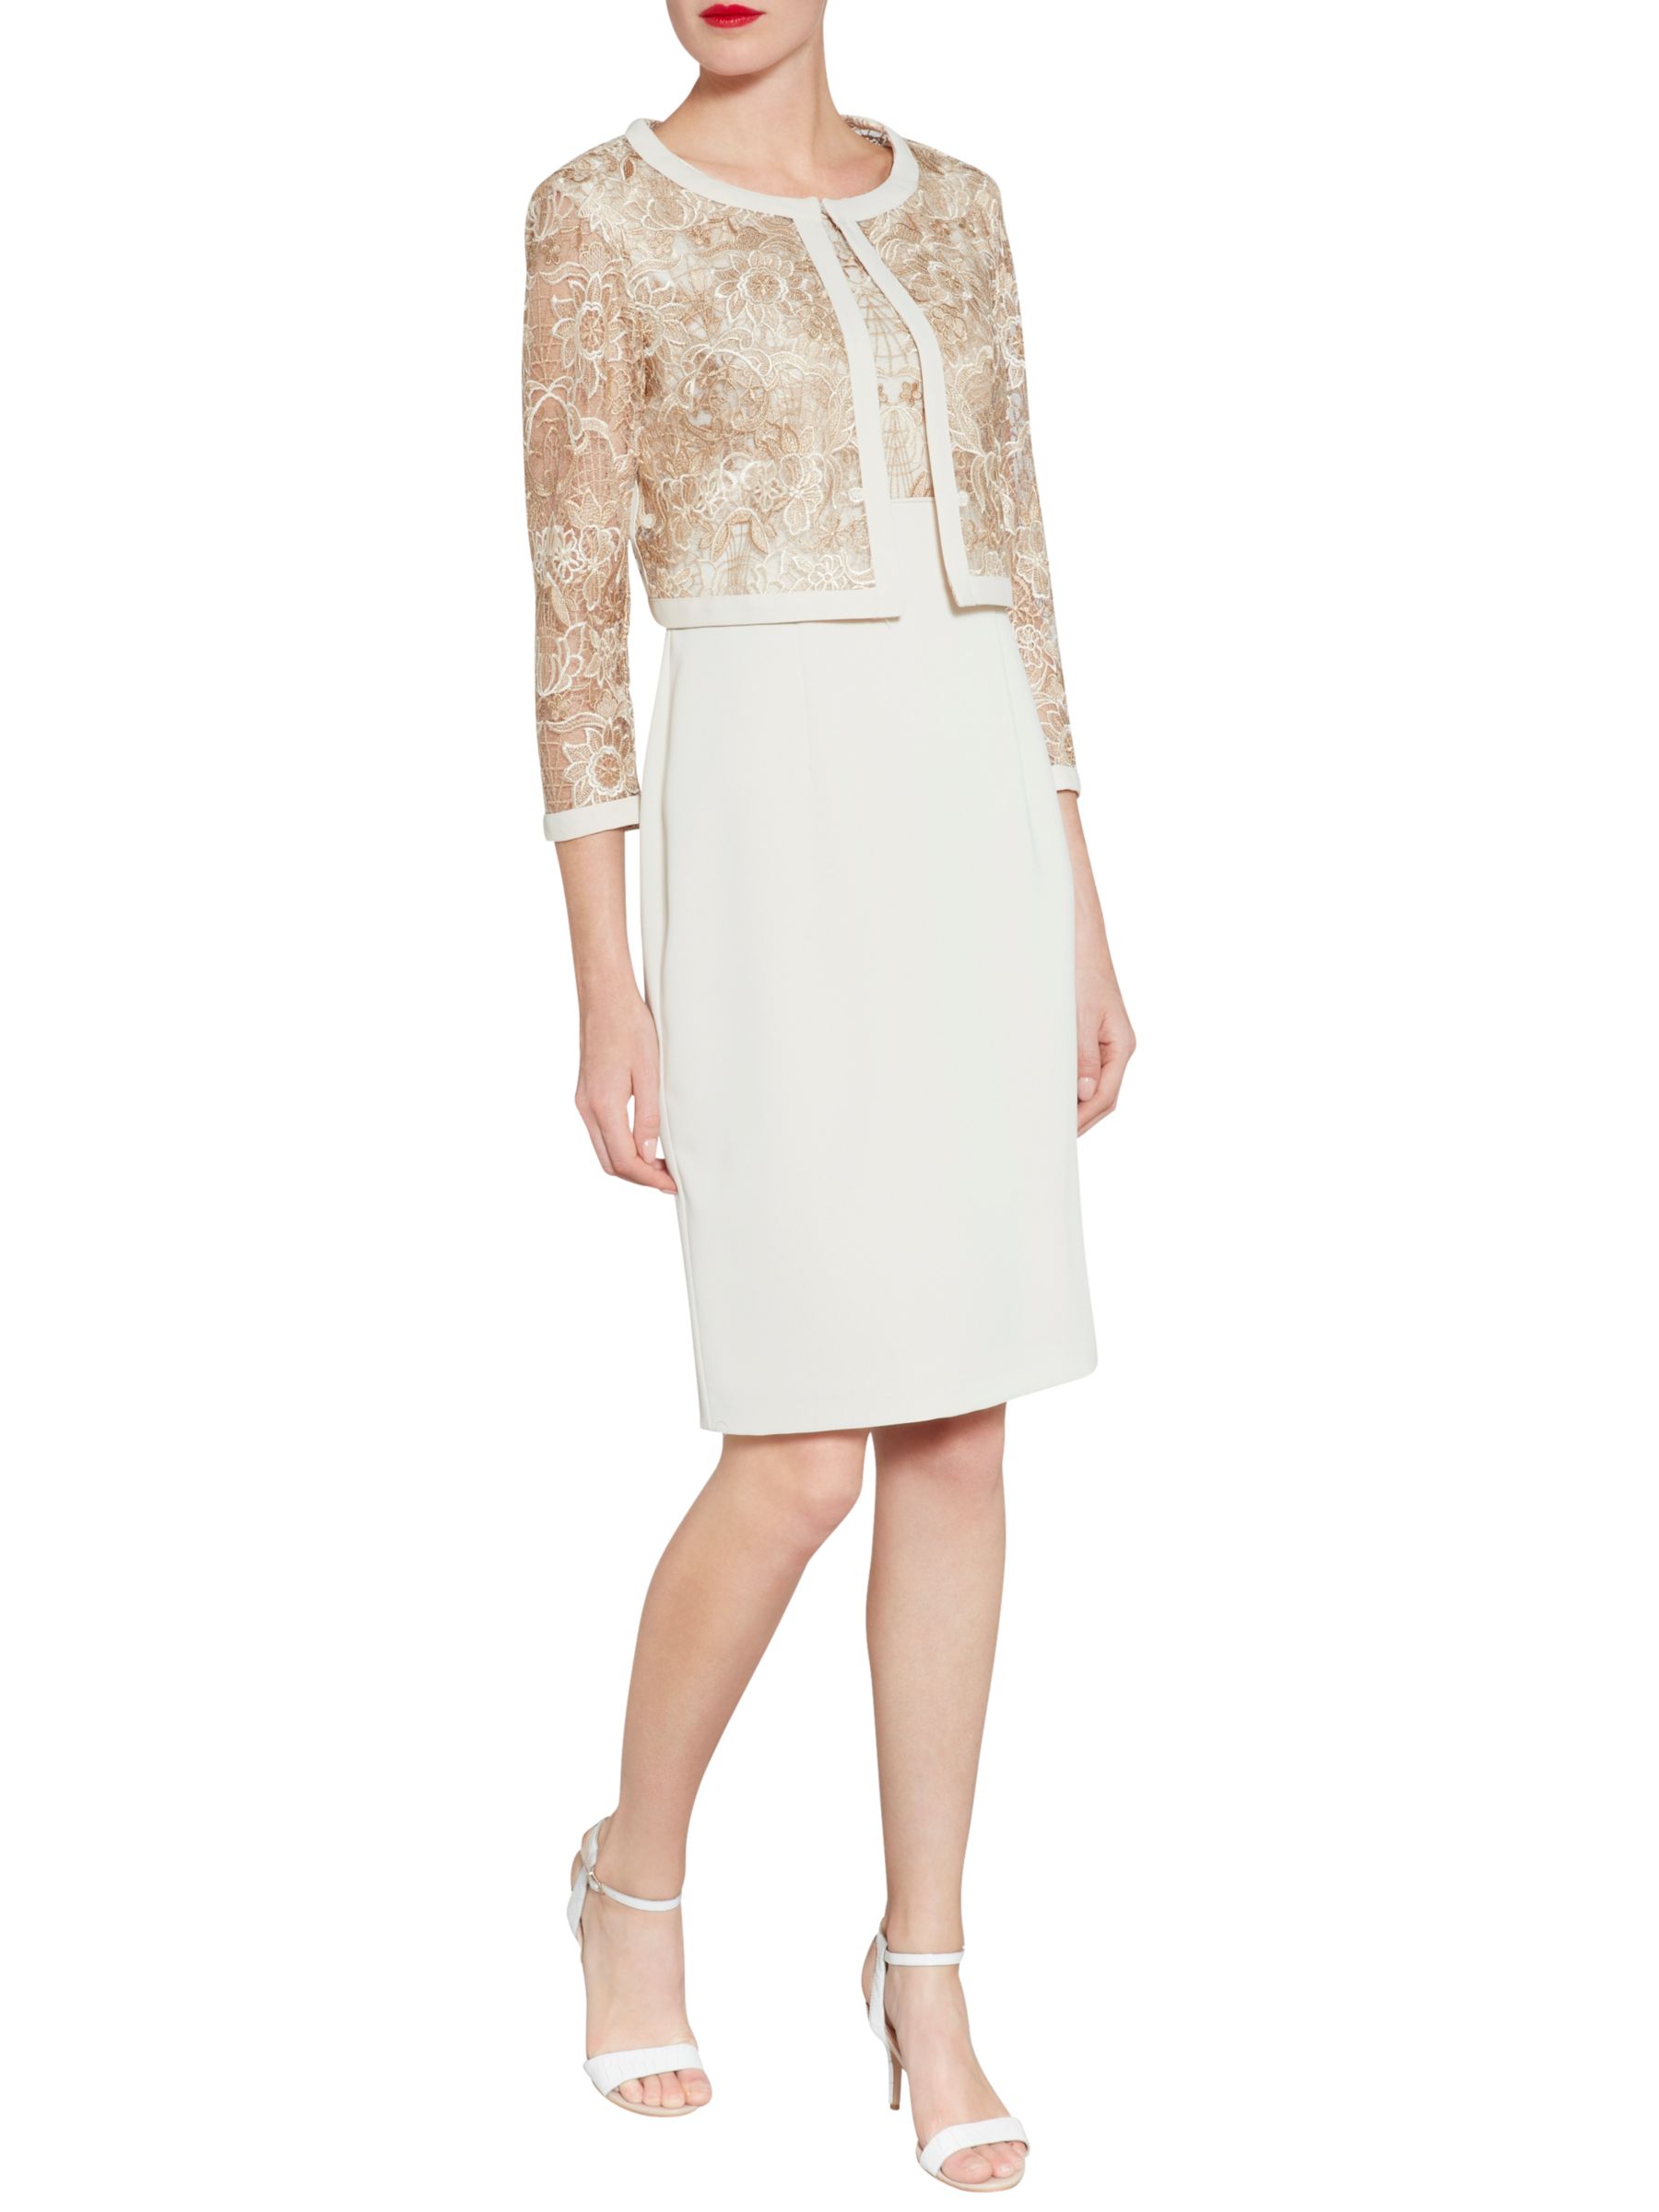 Gina Bacconi Crepe And Floral Embroidered Mesh Jacket, Butter Cream